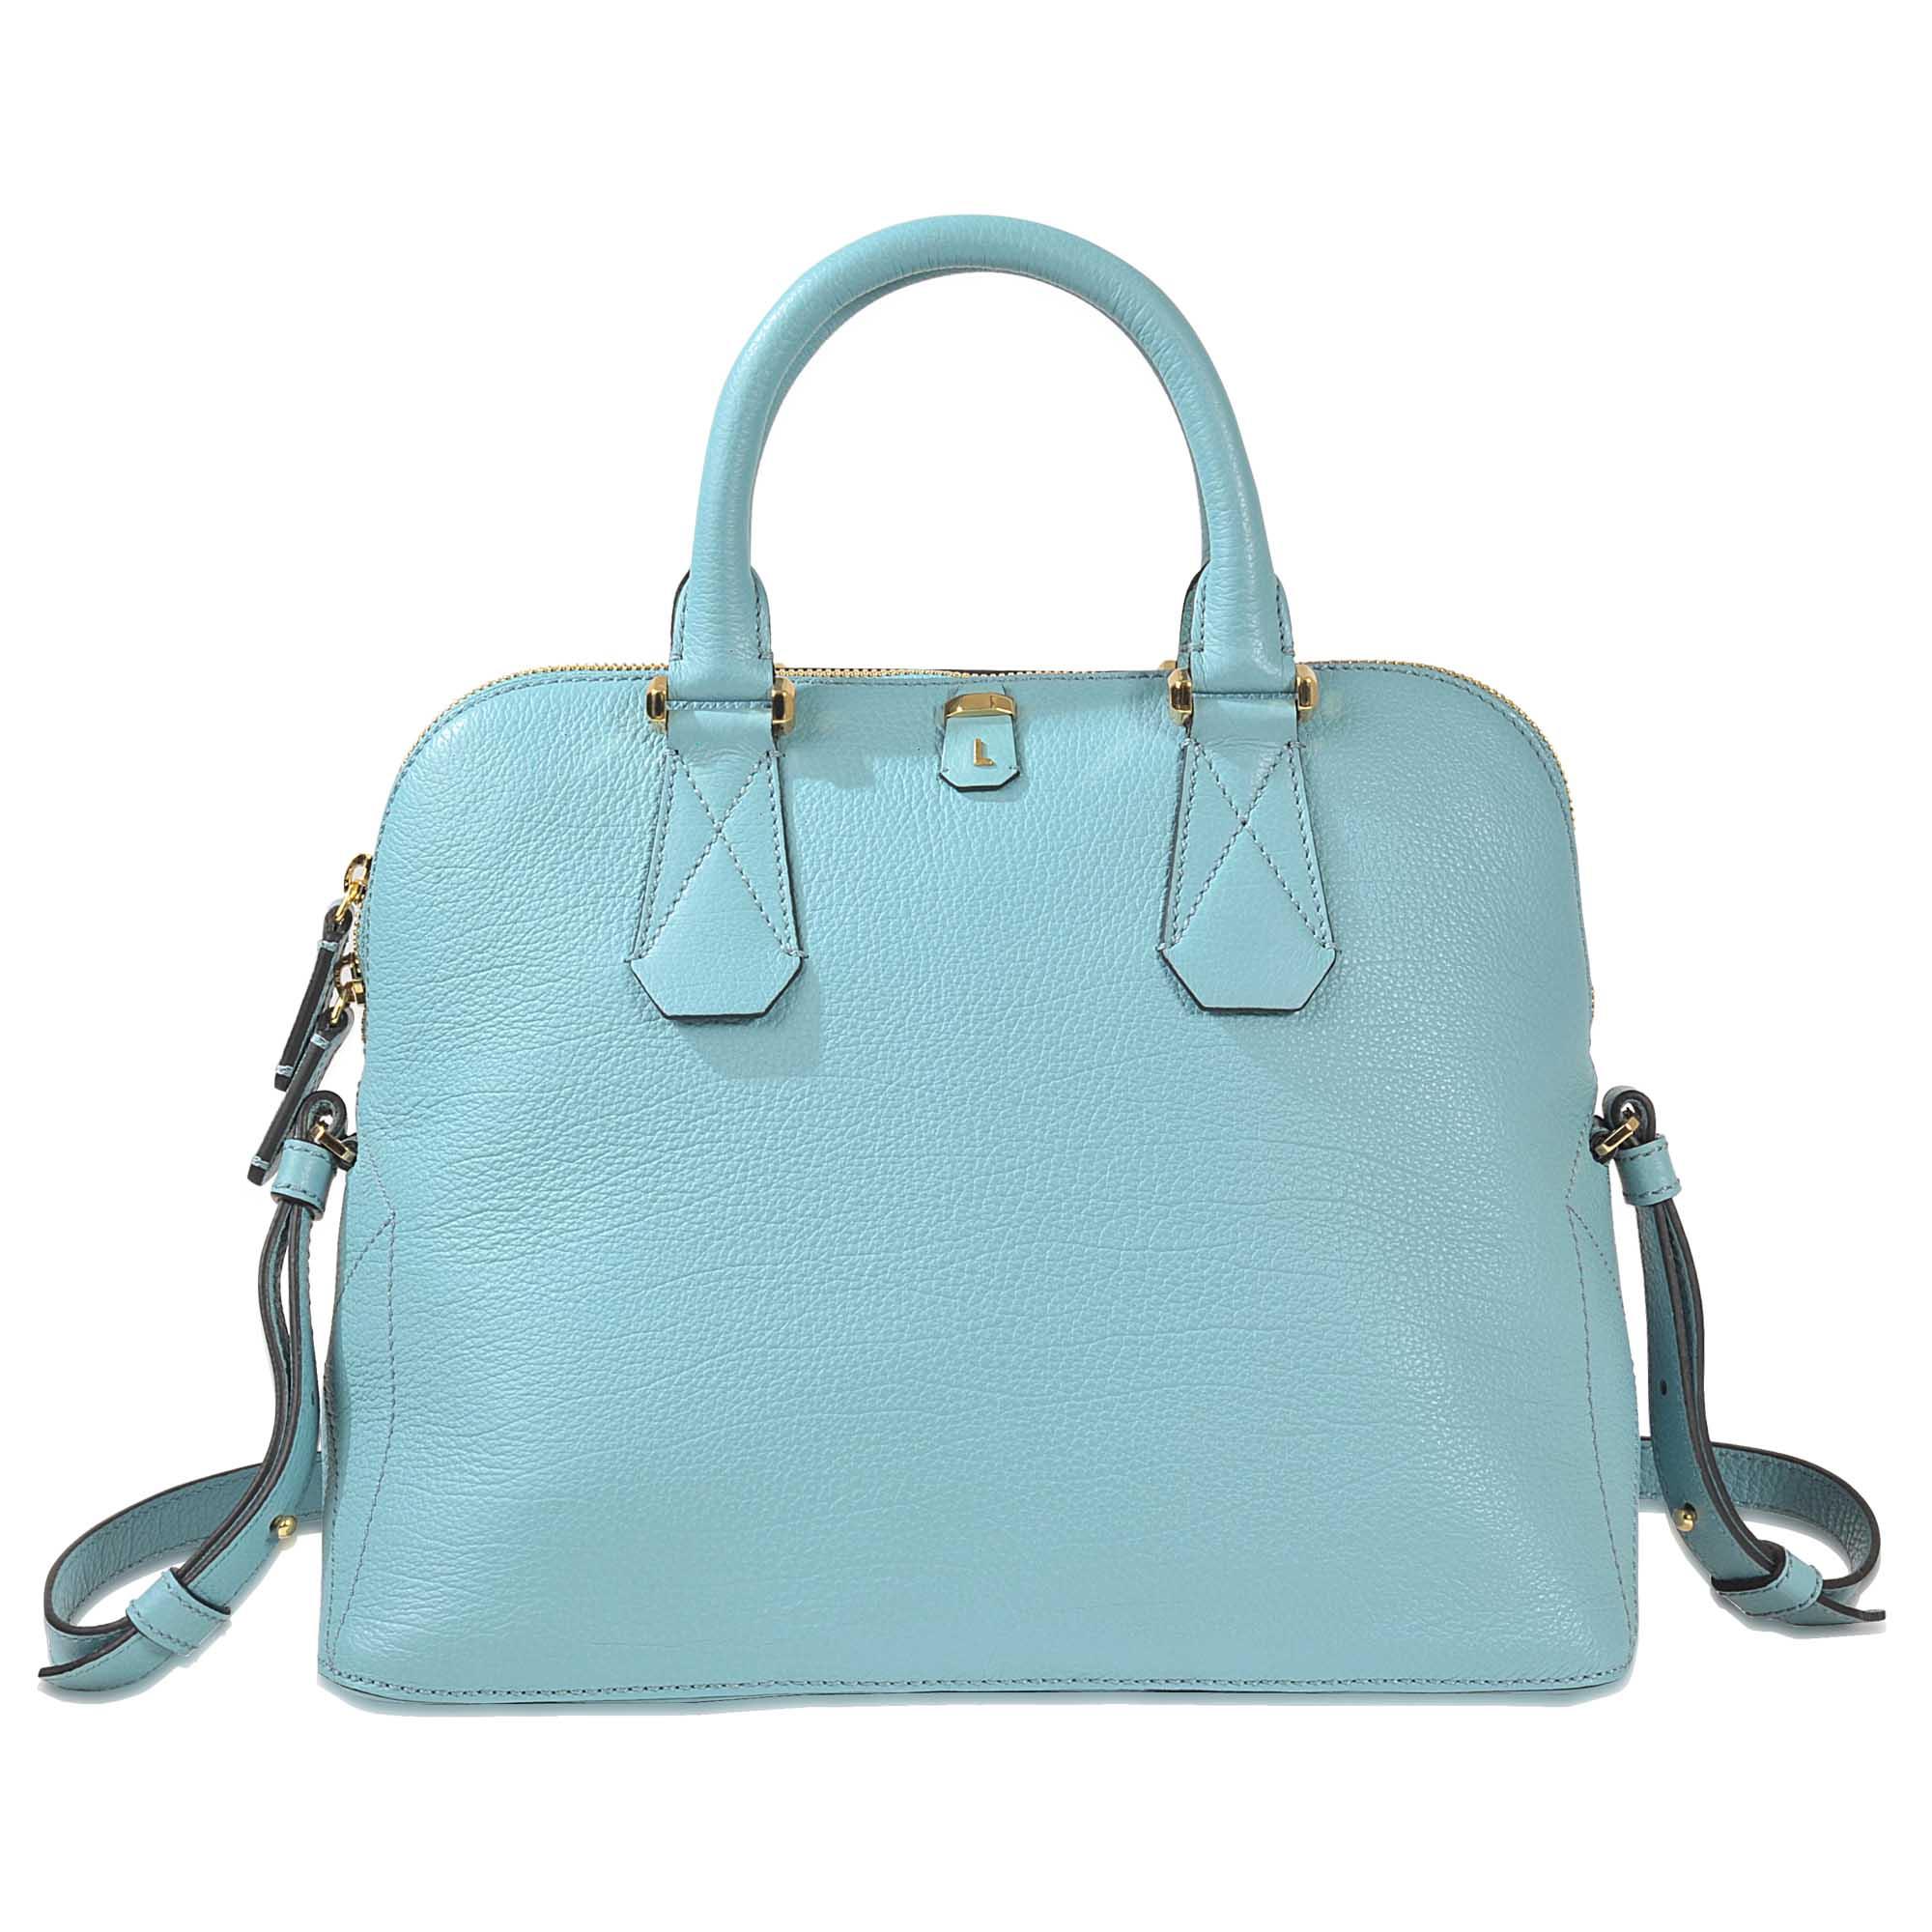 Lyst - Lancel Maxime S Bag in Blue - Save 51%